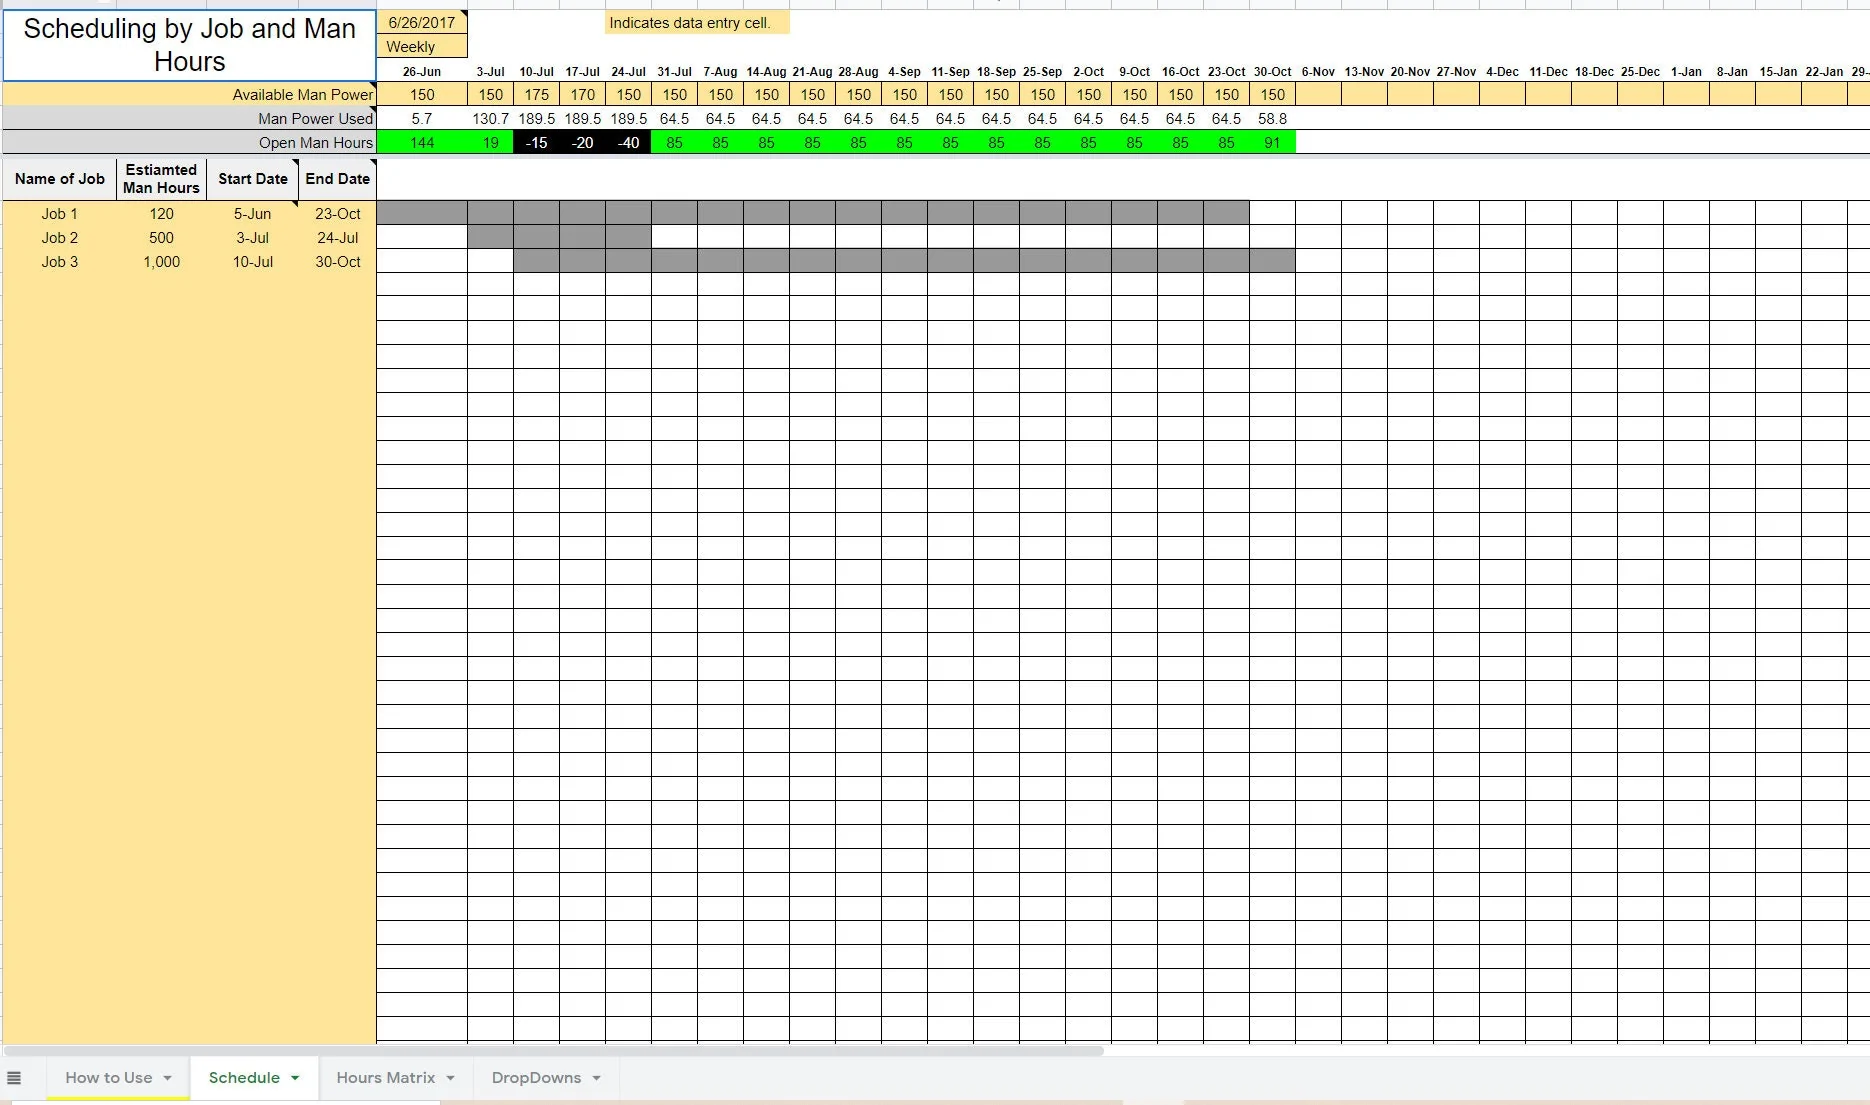 Gantt Scheduling: Man Hours Budgeting Included (Zip archive file document (ZIP)) Preview Image